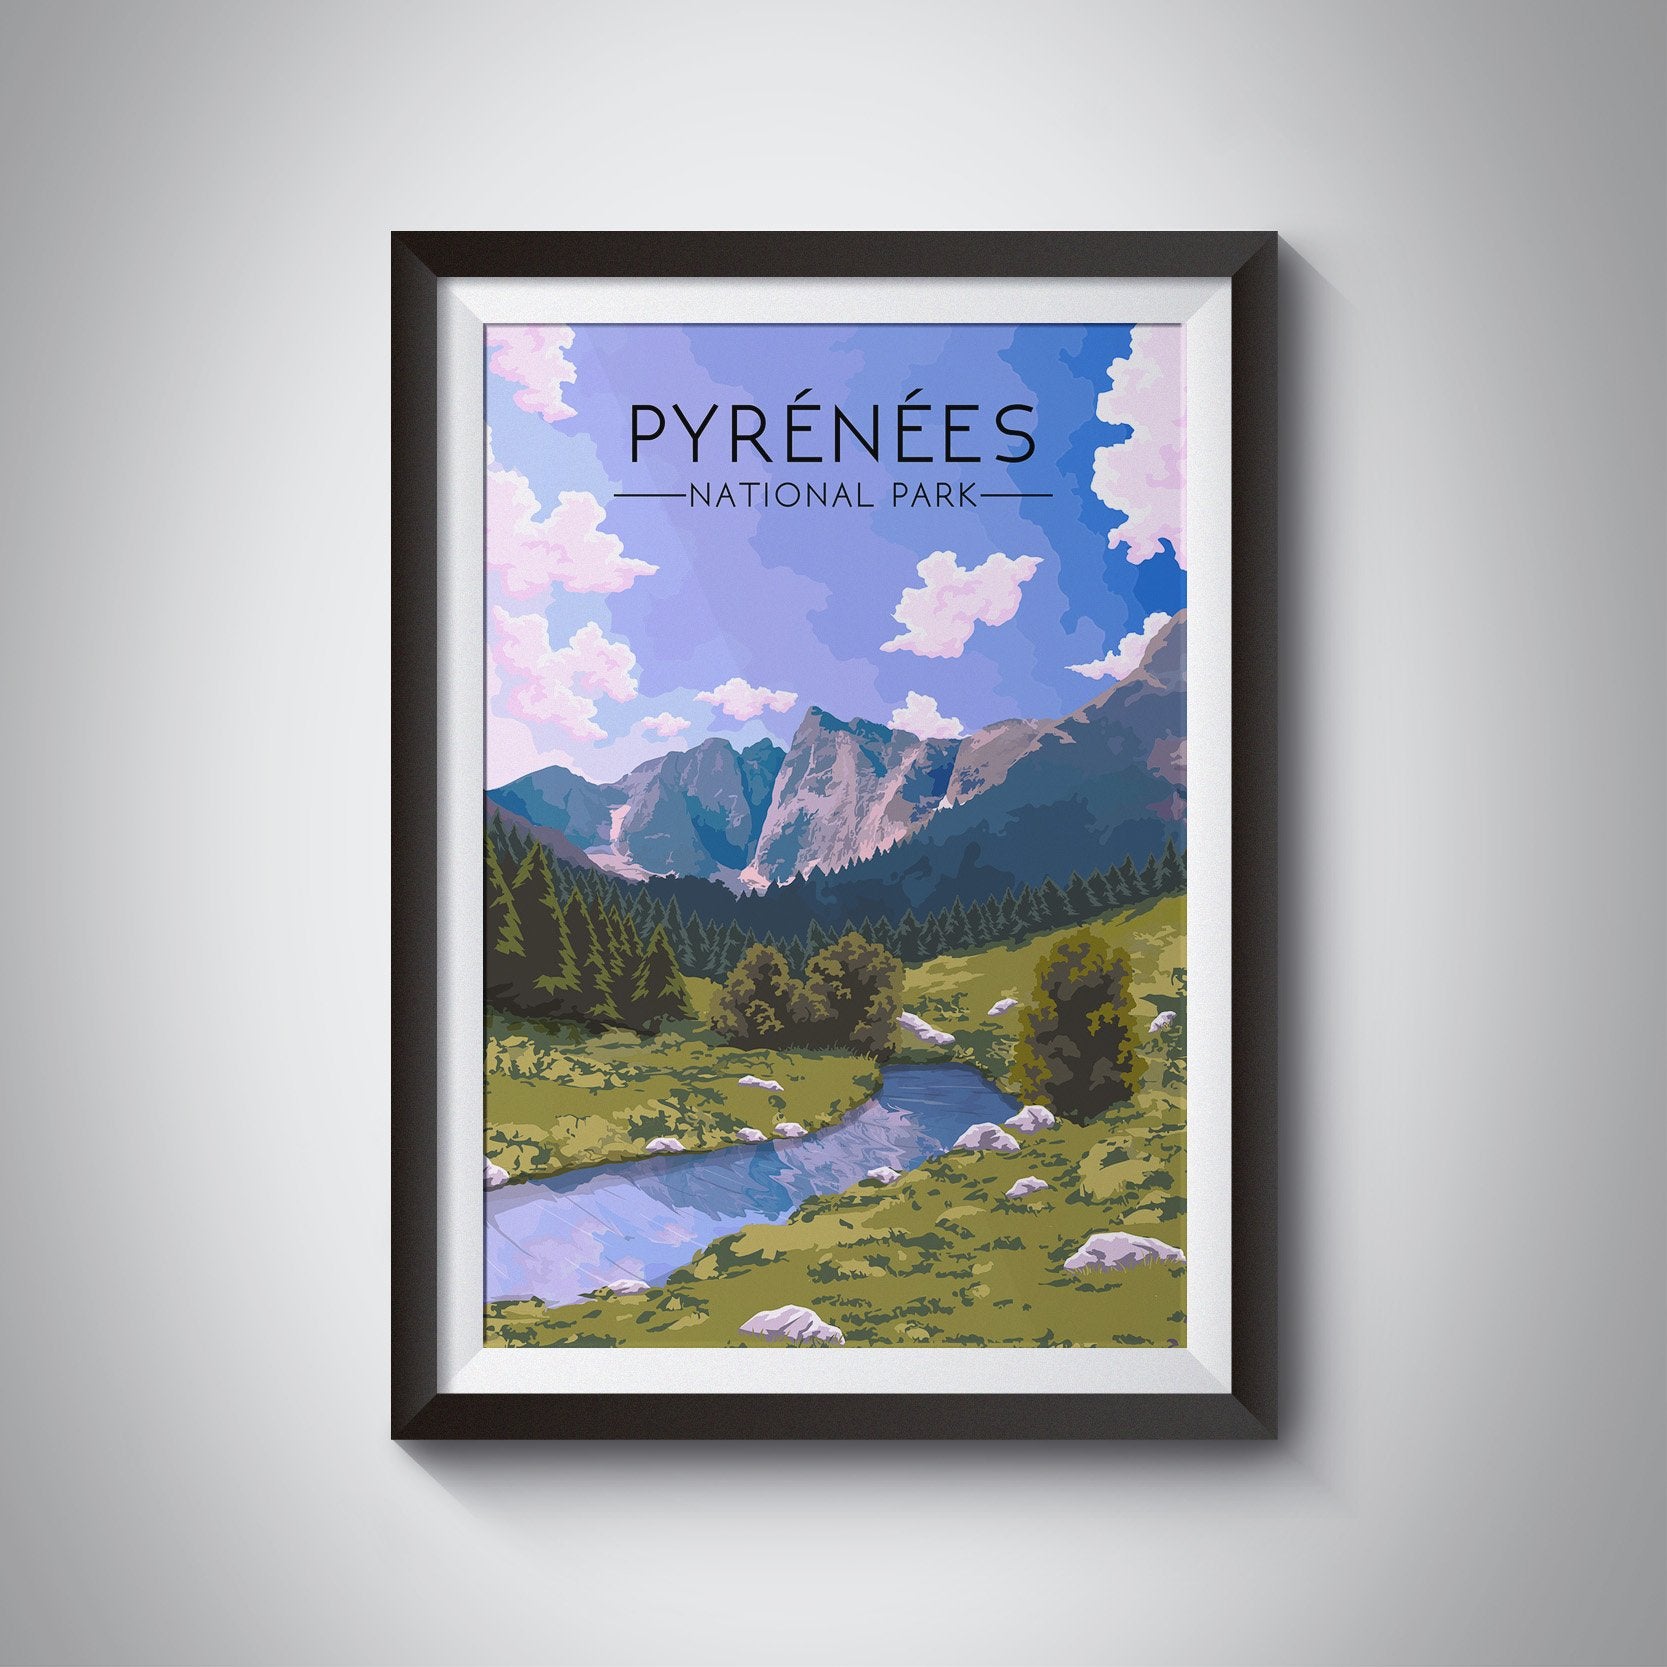 Pyrenees National Park Travel Poster